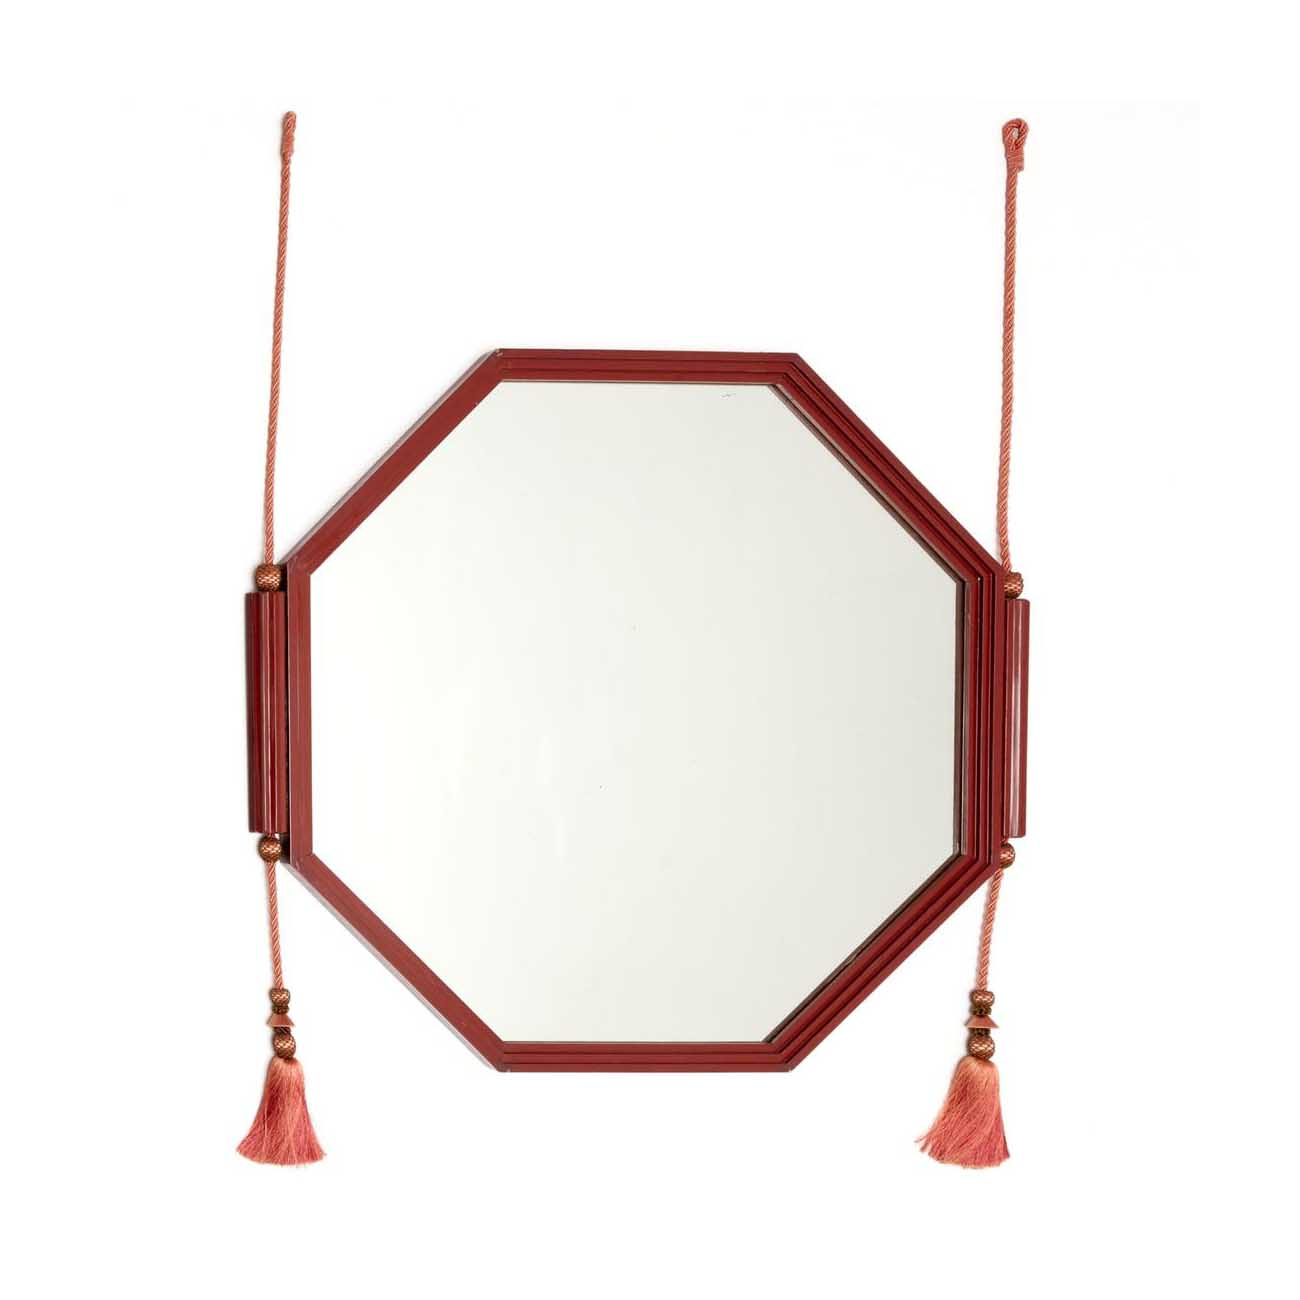 Circa-1930 Art Deco octagonal mirror in the manner of Jules Leleu, which sold for $5,000 plus the buyer’s premium in May 2024. Image courtesy of Millea Bros. and LiveAuctioneers.